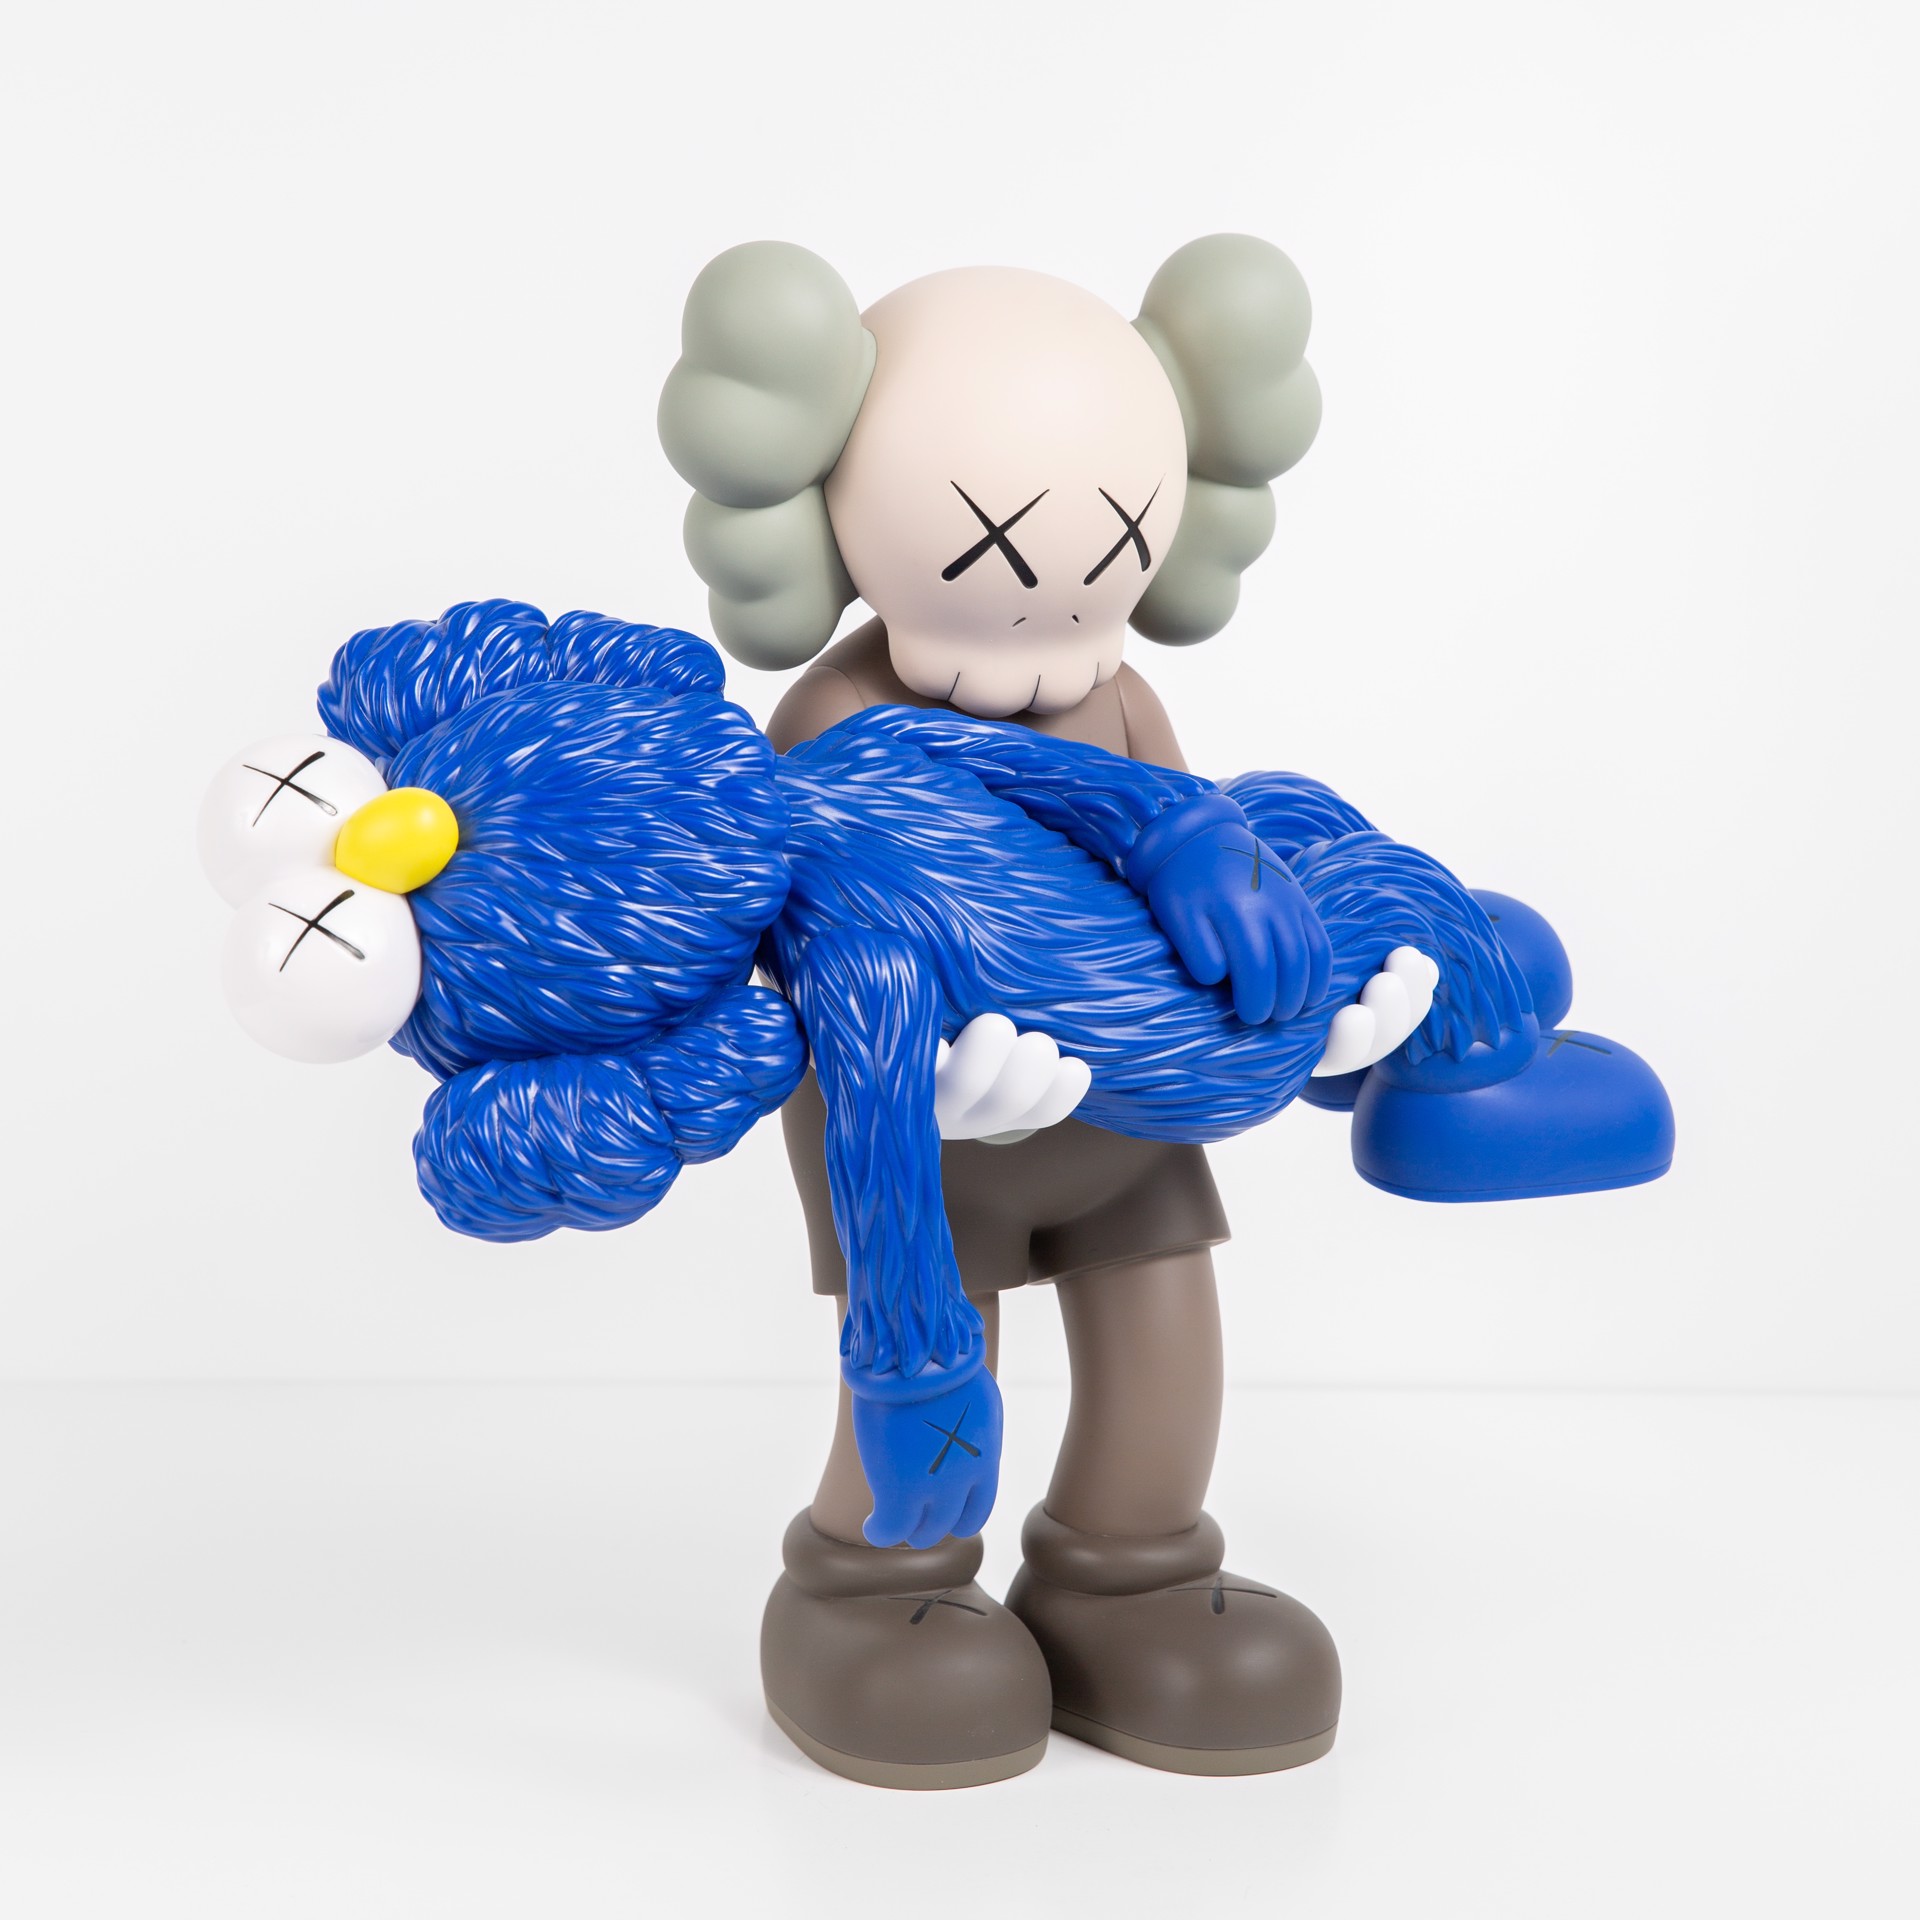 'Gone' Brown by Kaws